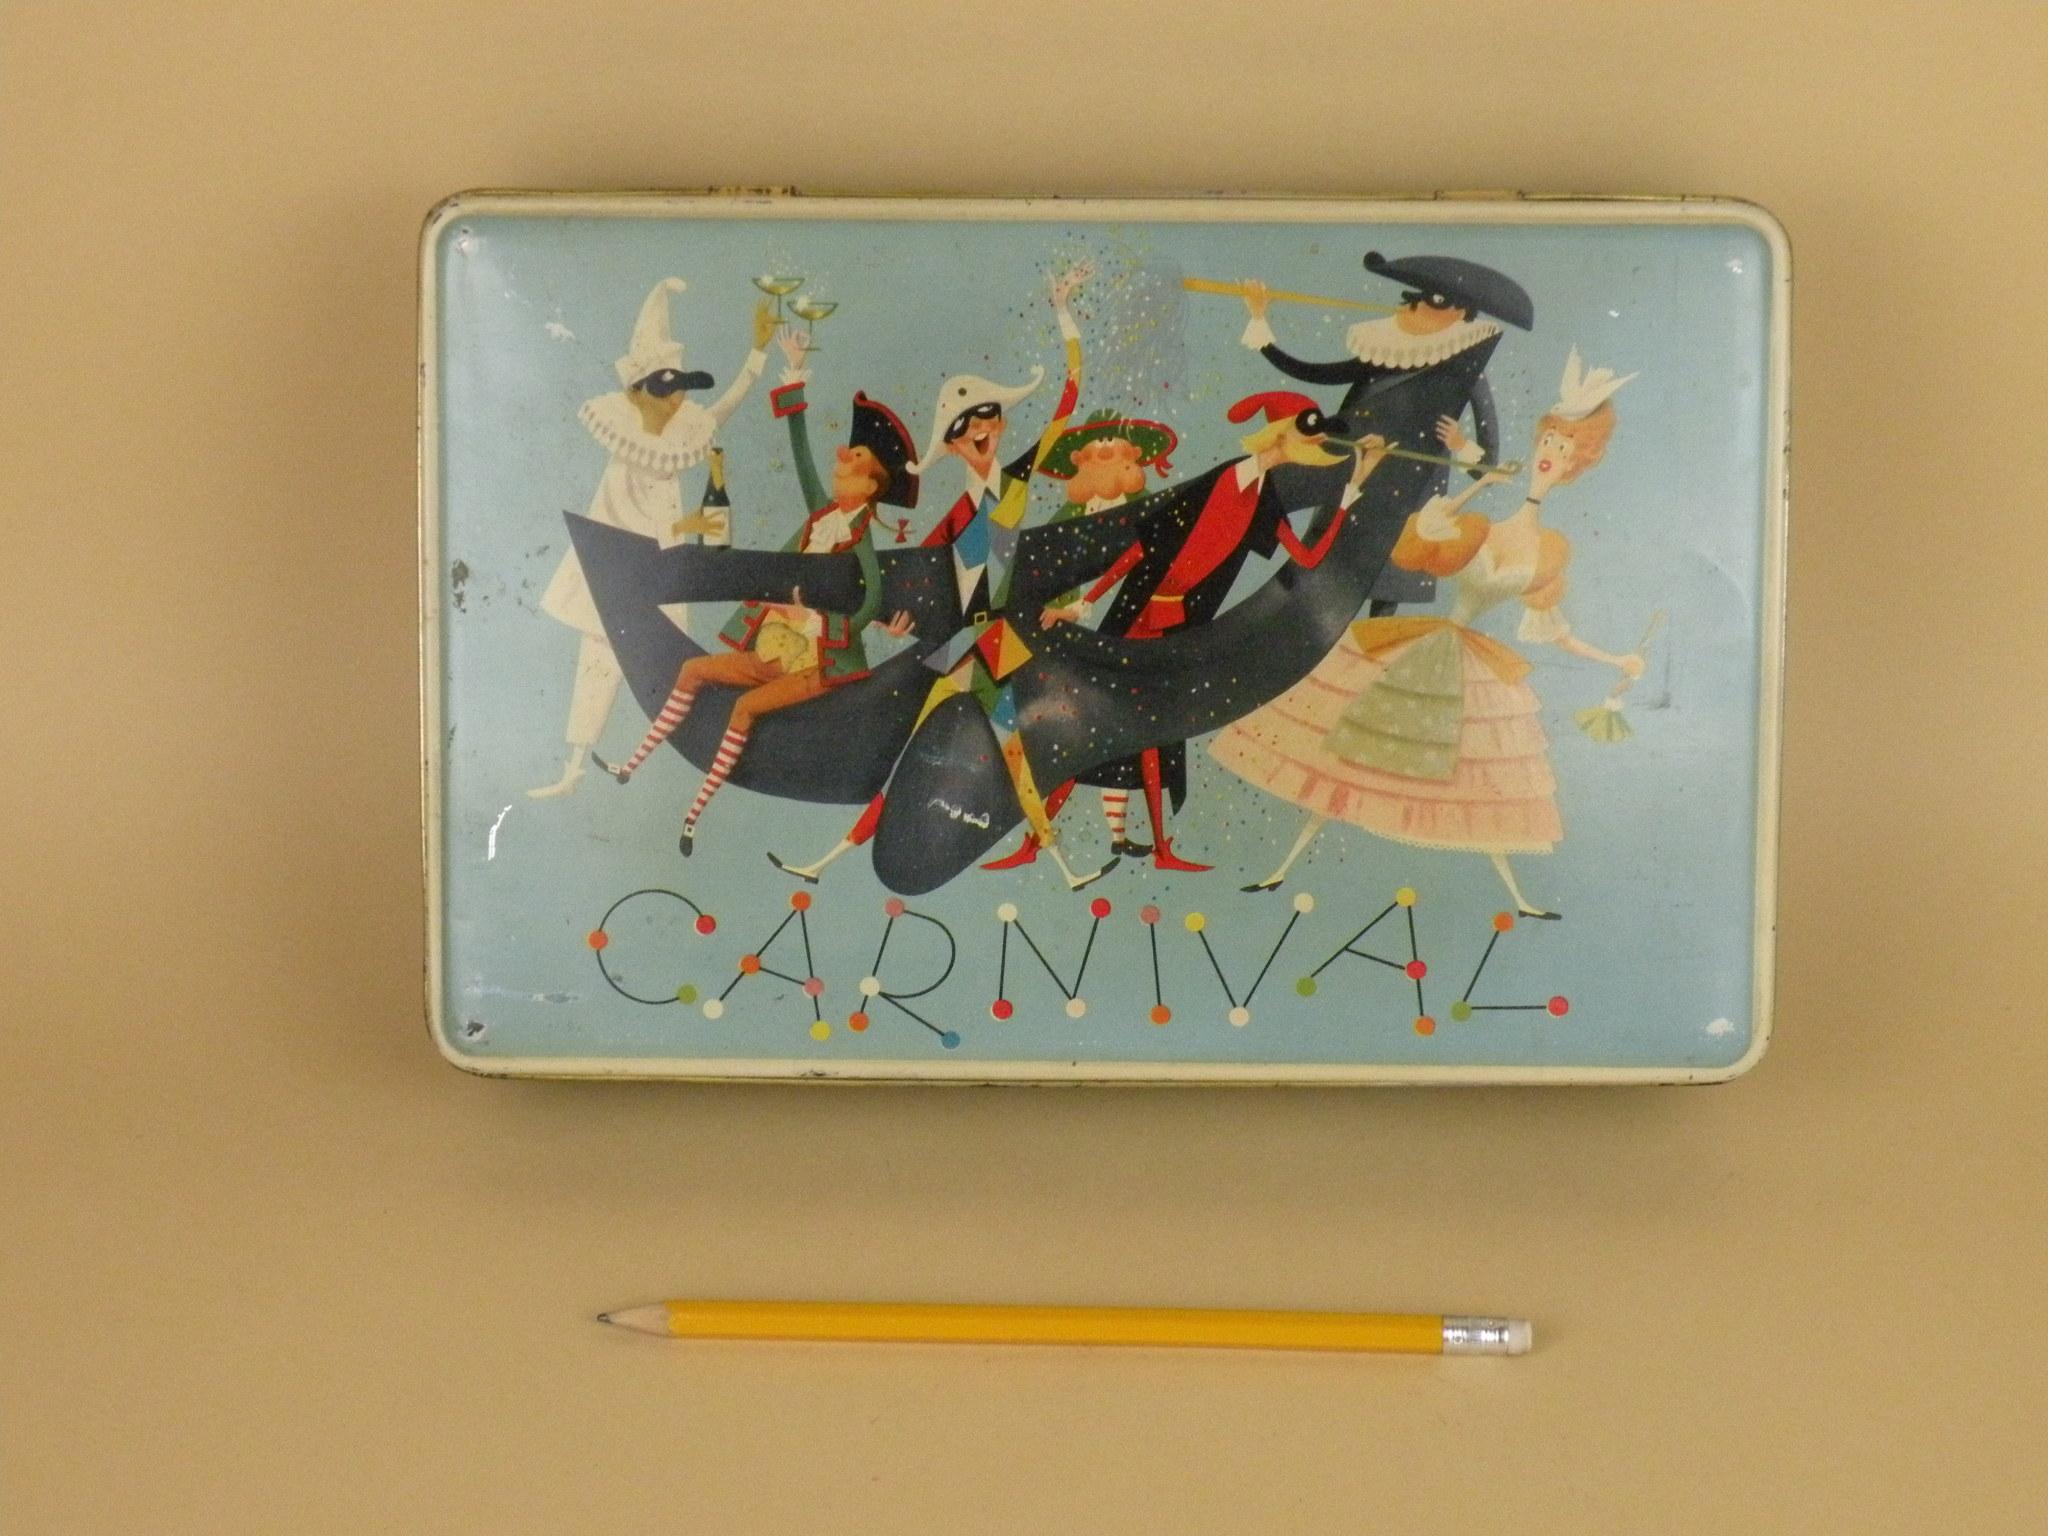 1950s Vintage Italian Carnival Edition Screen Printed Pavesi Biscuits Tin Box For Sale 4